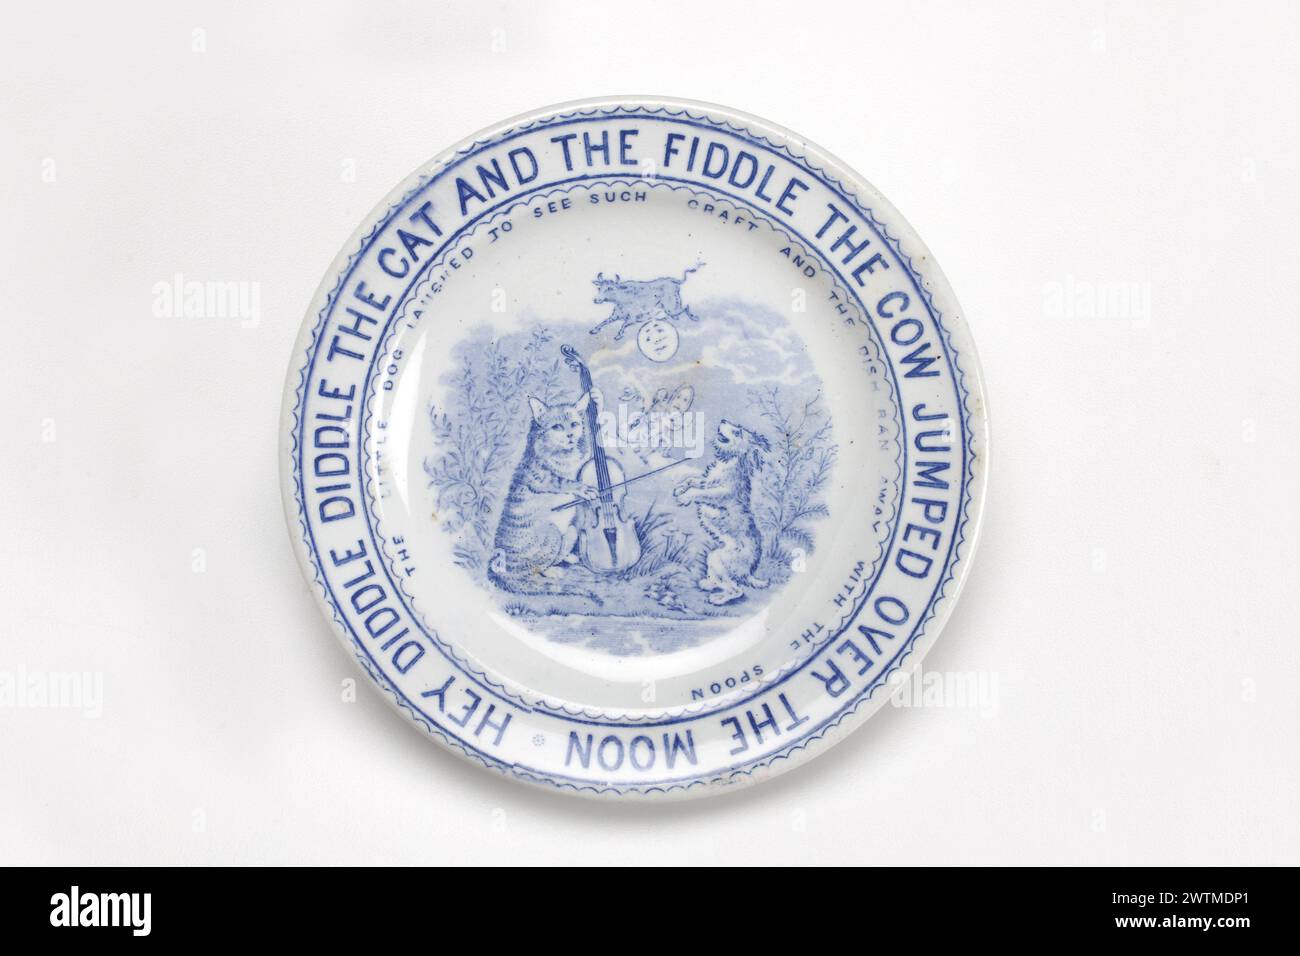 Toy plate - Hey Diddle Diddle the Cat and the Fiddle The Cow Jumped over the Moon The Little Dog laughed to see Such Craft and the Dish Ran away with the Spoon Whittaker & Company, 1886-1892 Whittaker & Company, 1886-1892 Stock Photo